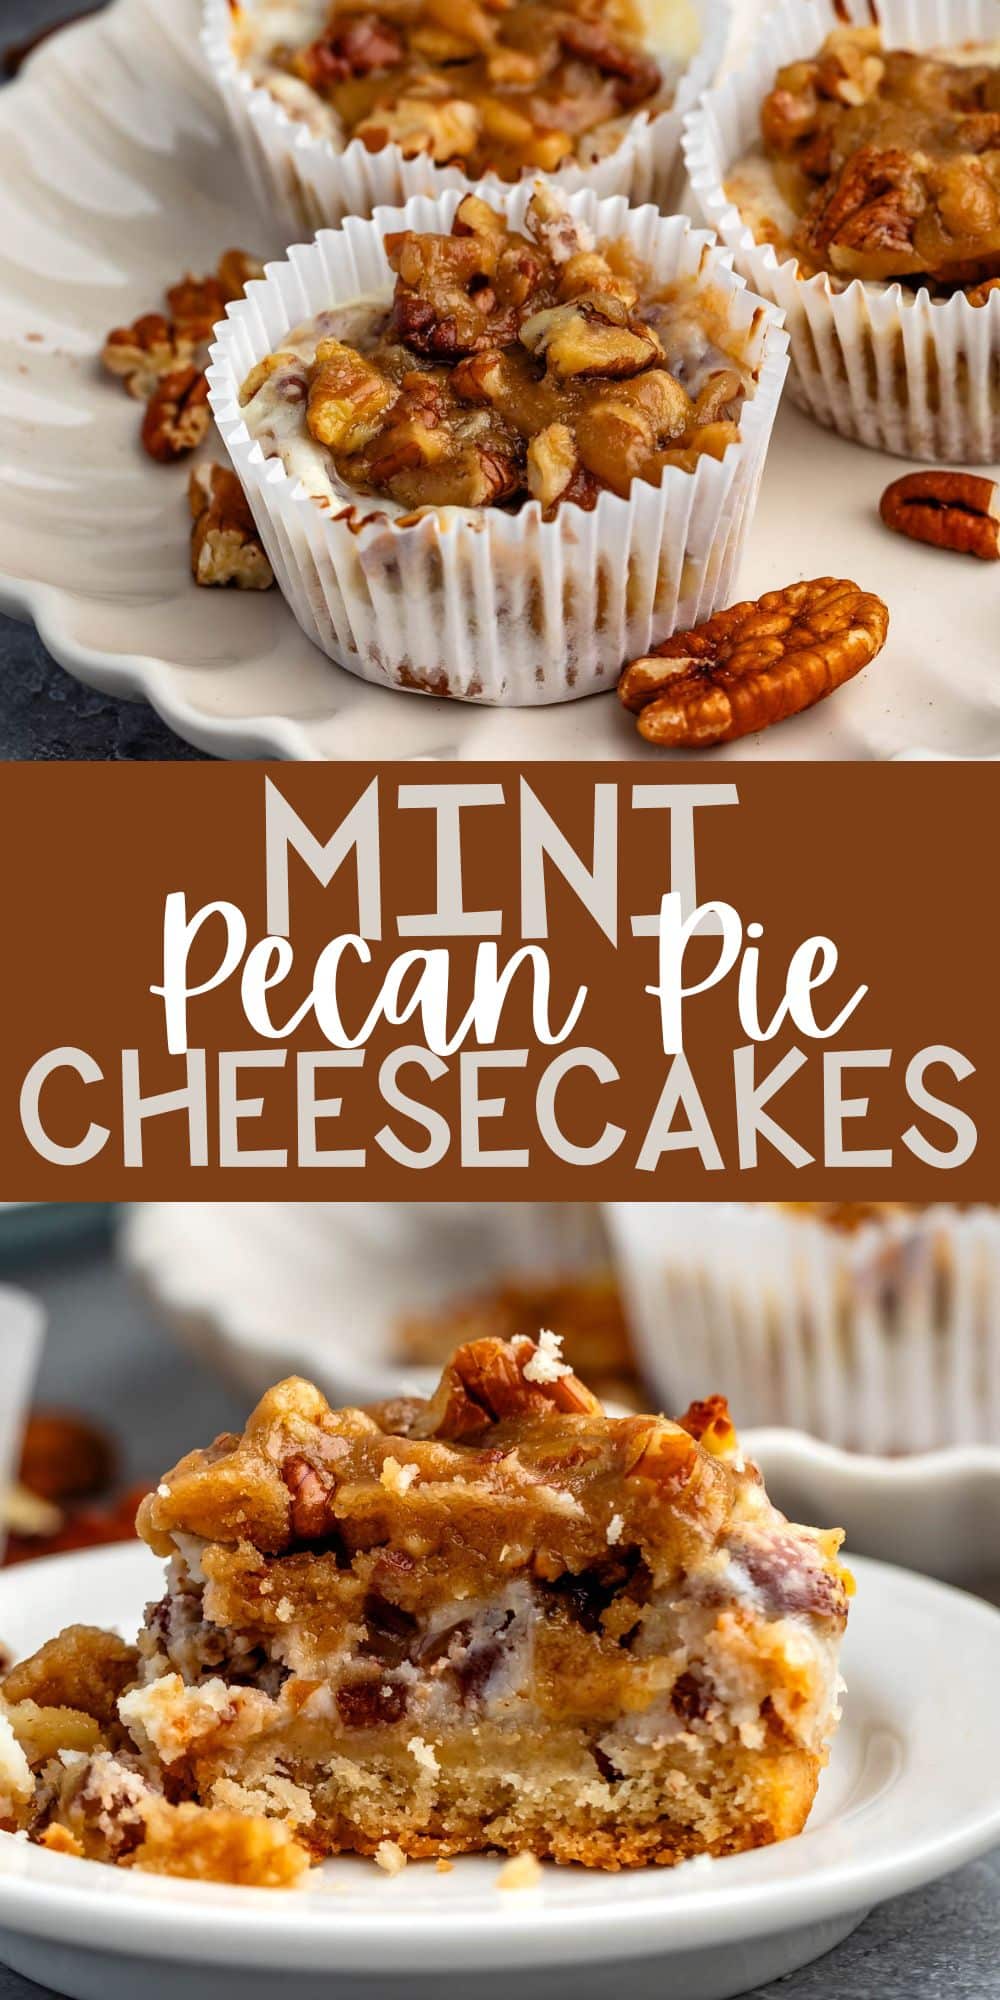 two photos of mini pecan pie cheesecake in a white cupcake wrapper with words on the image.